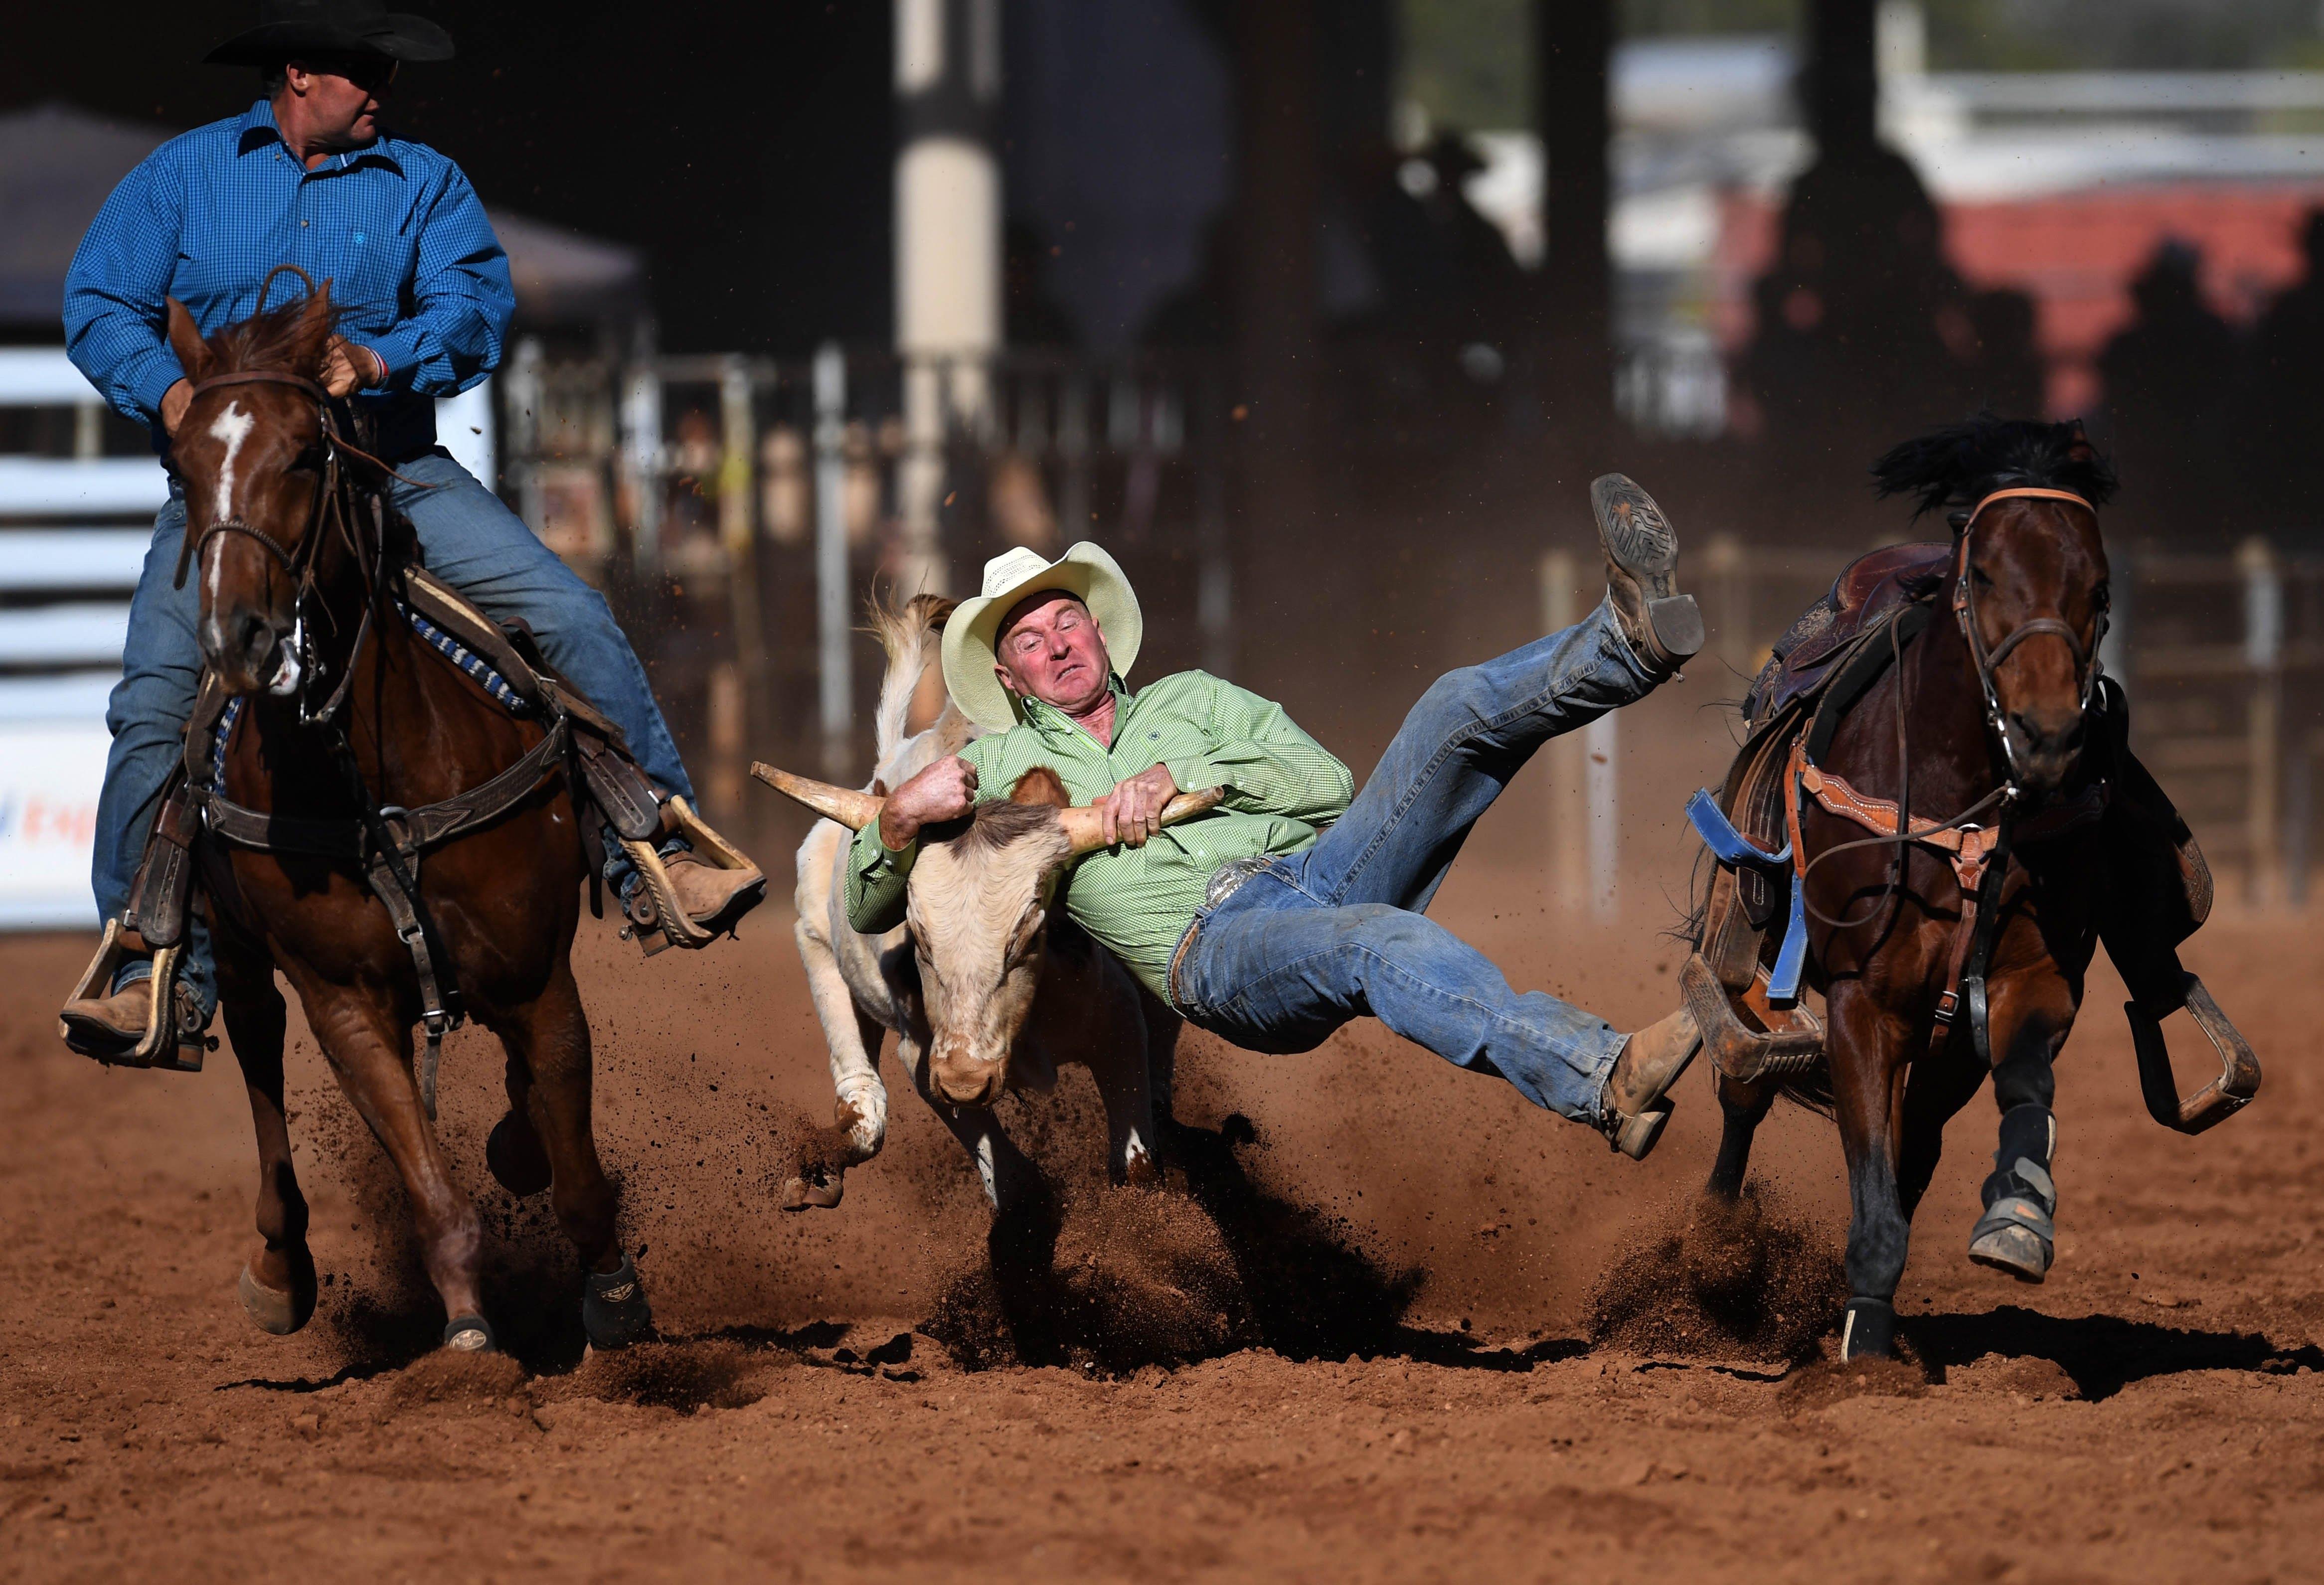 Biggest rodeo in the Southern Hemisphere - Mount Isa Rodeo in Queensland